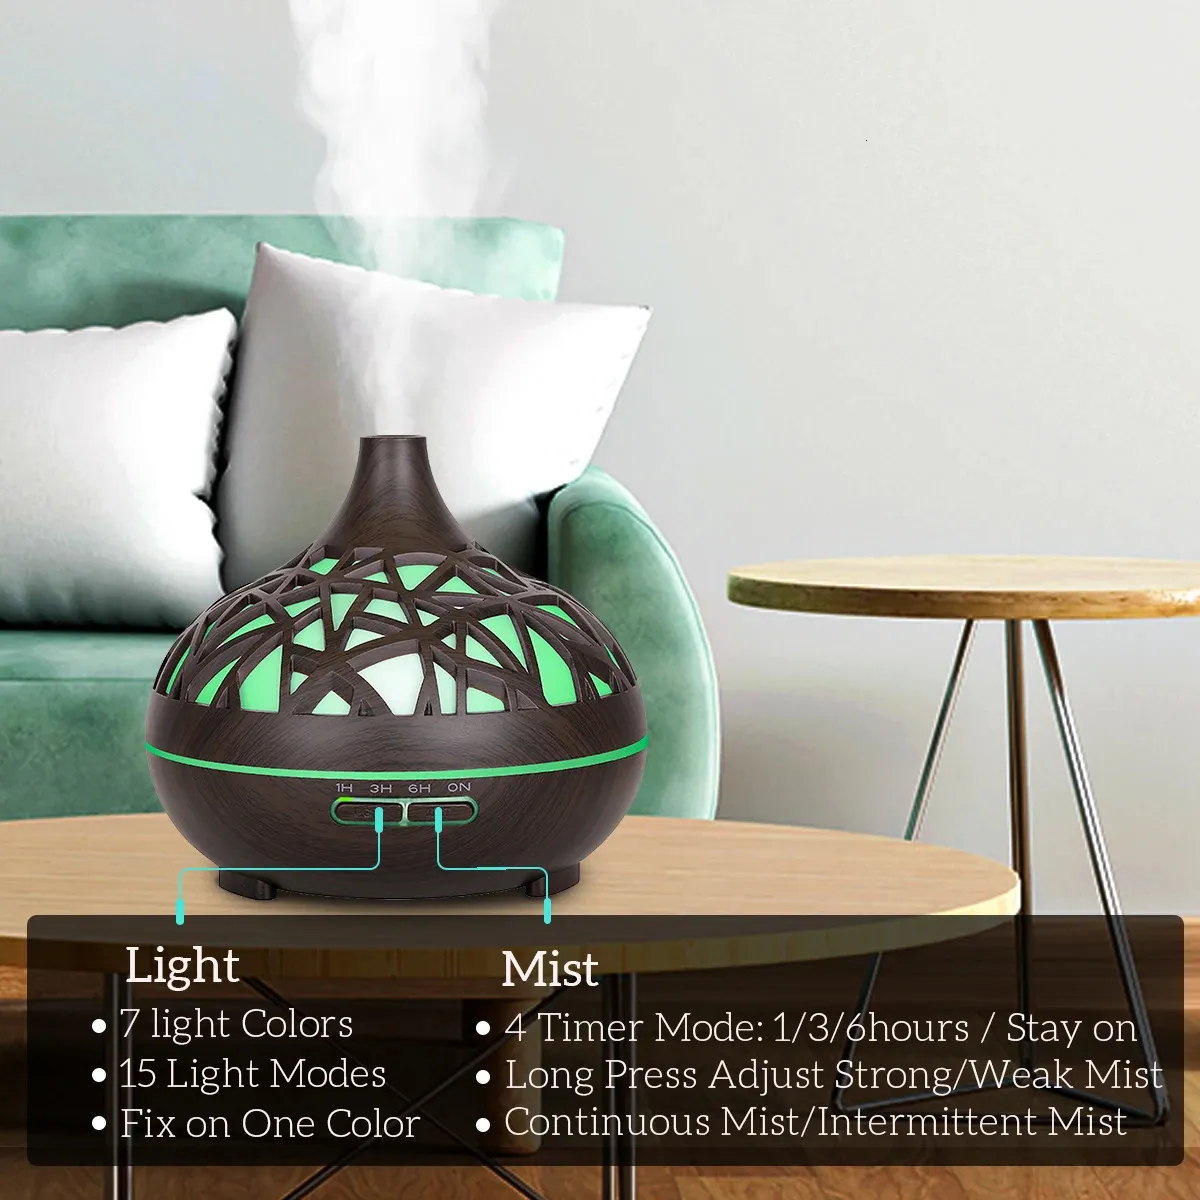 Essential Oils Diffusers Humidifier Aromatherapy Oil Diffuser Hollow Wood Grain Remote Control Ultrasonic Air Cool with 7 Color LED l231023